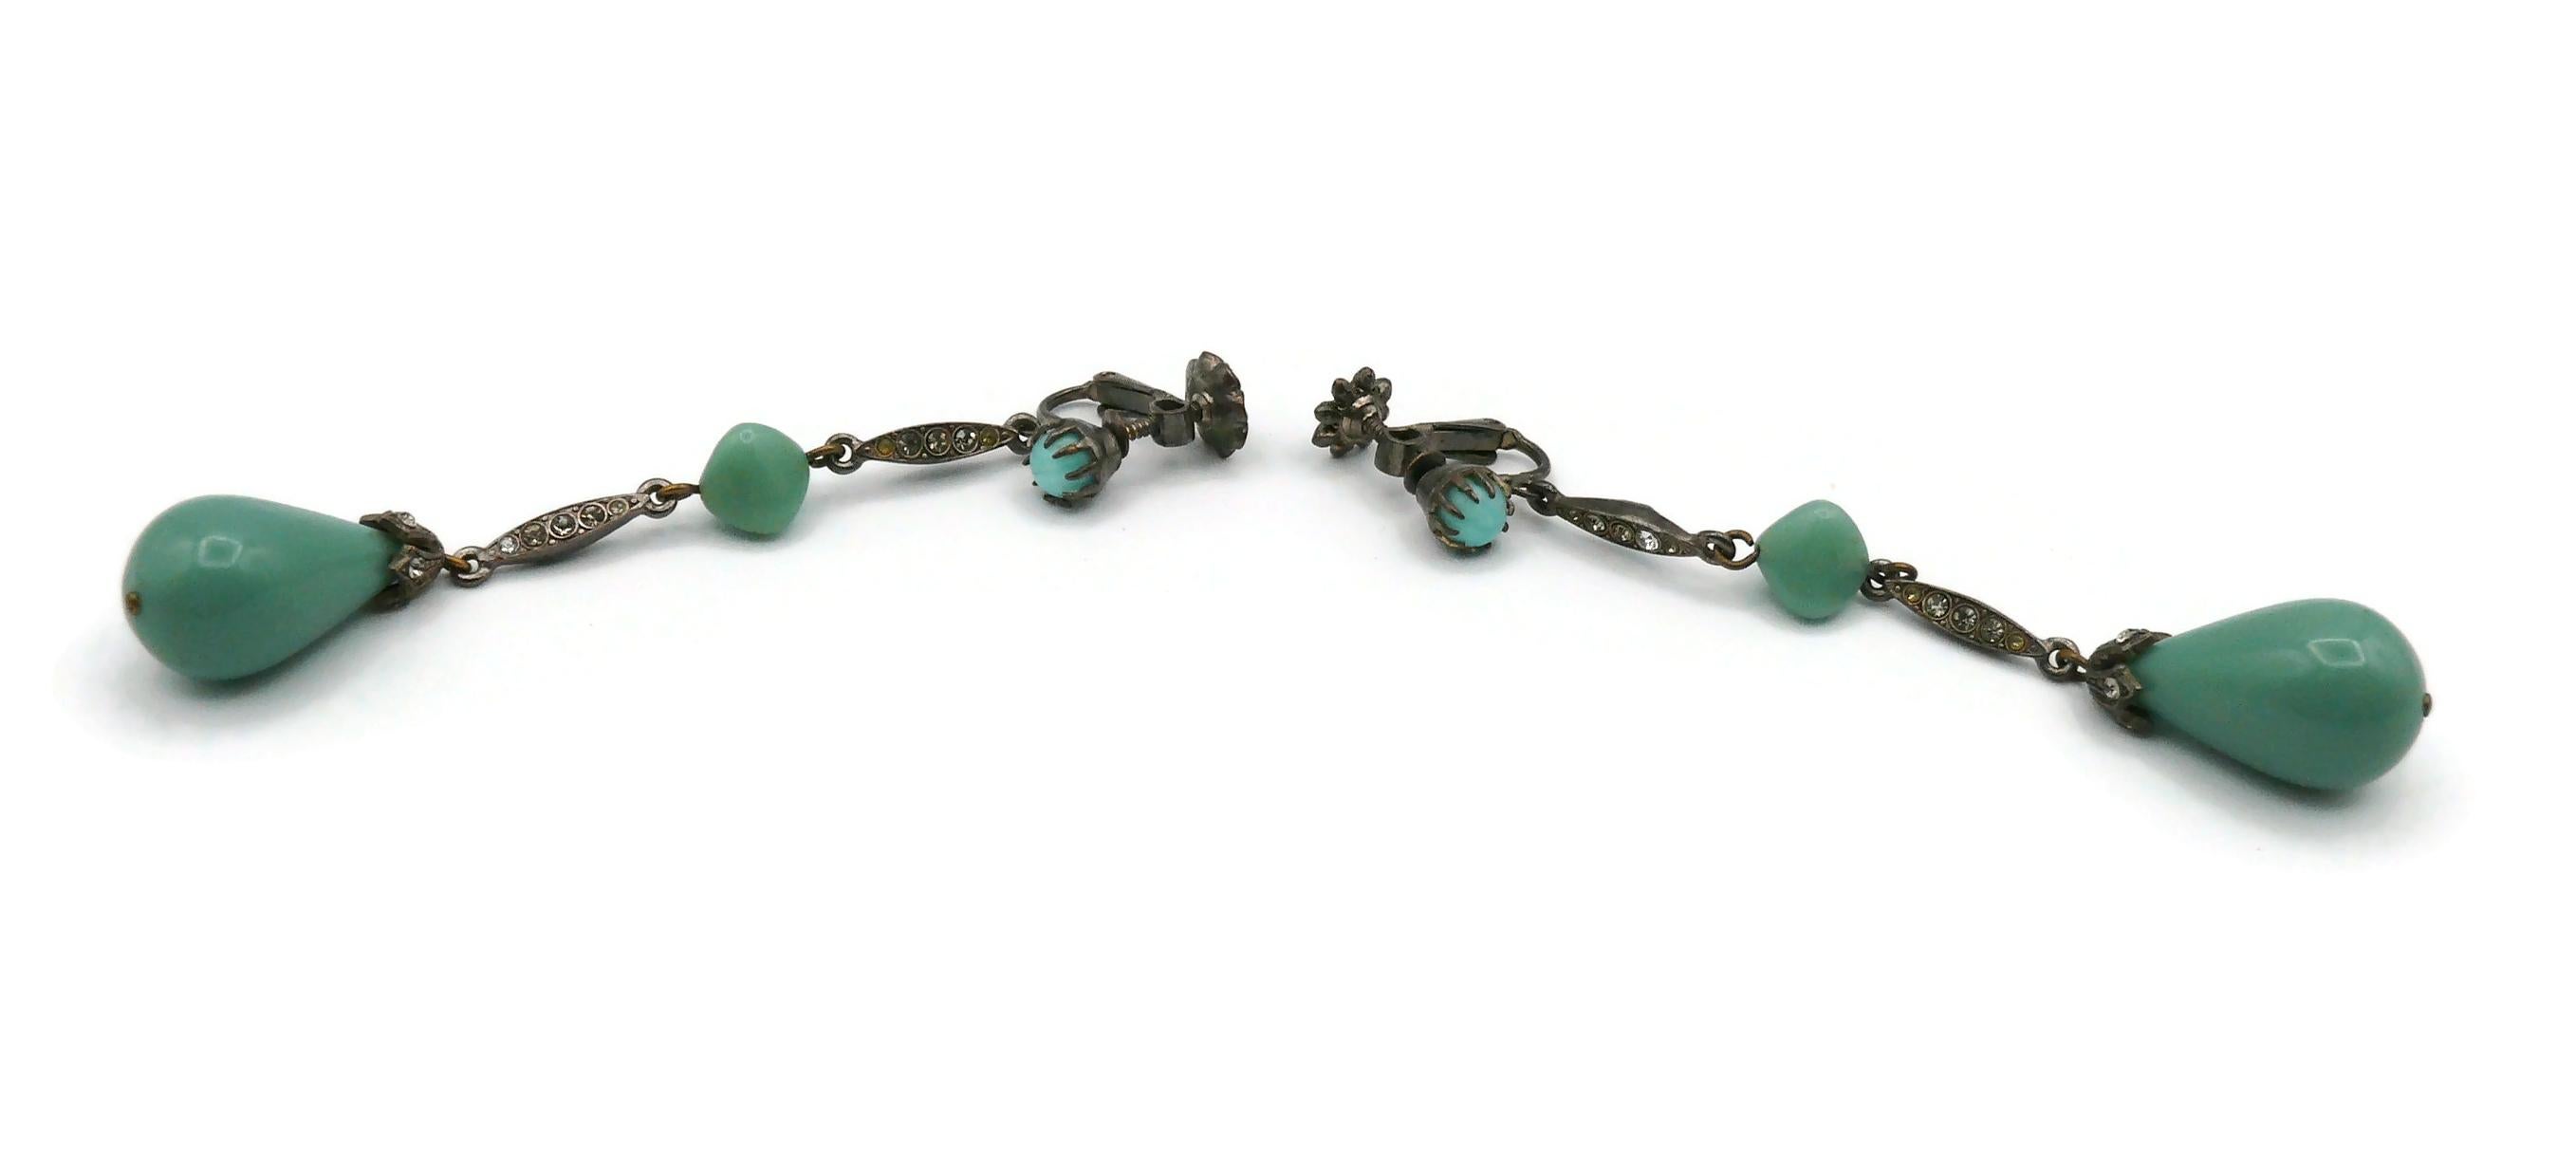 Women's Christian Dior Boutique Vintage Victorian Insipred Faux Jade Dangling Earrings For Sale